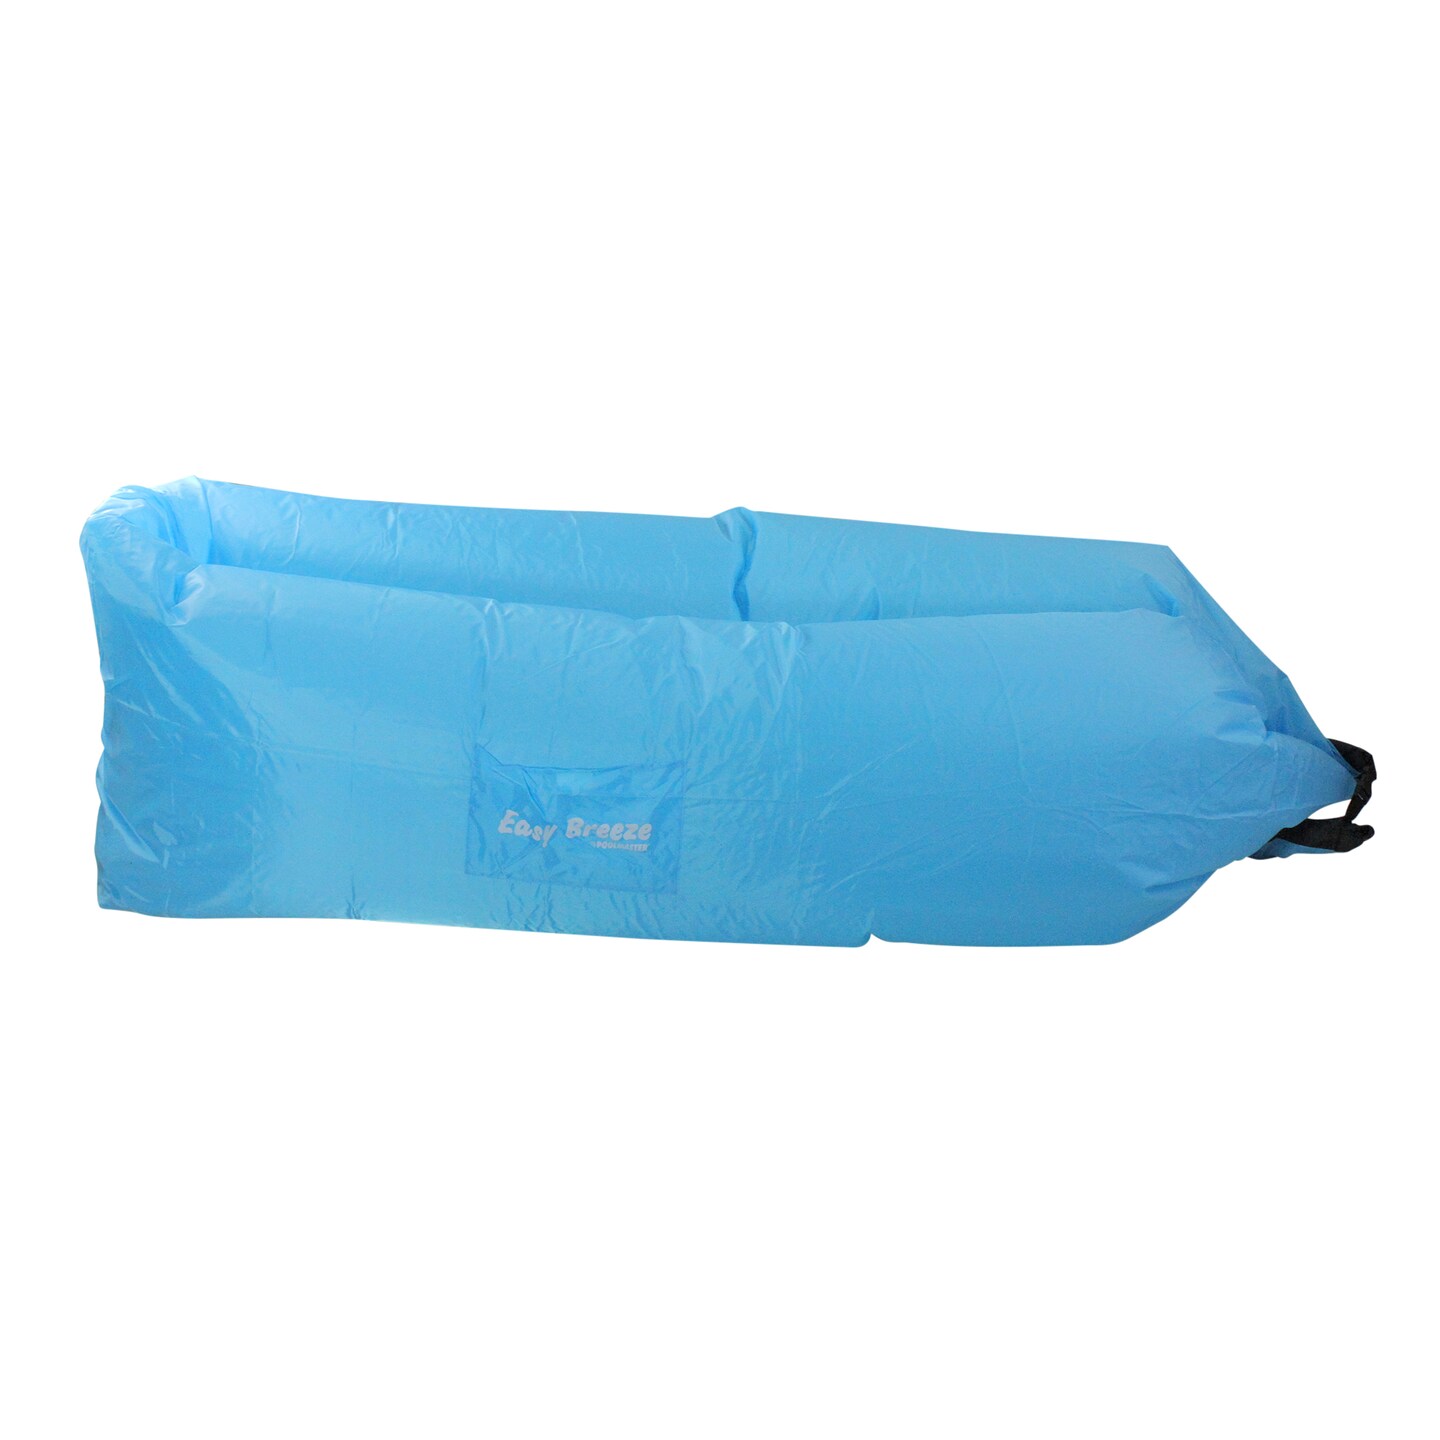 Pool Central Inflatable Blue Easy Breeze Land or Water Air Sofa, 94-Inch